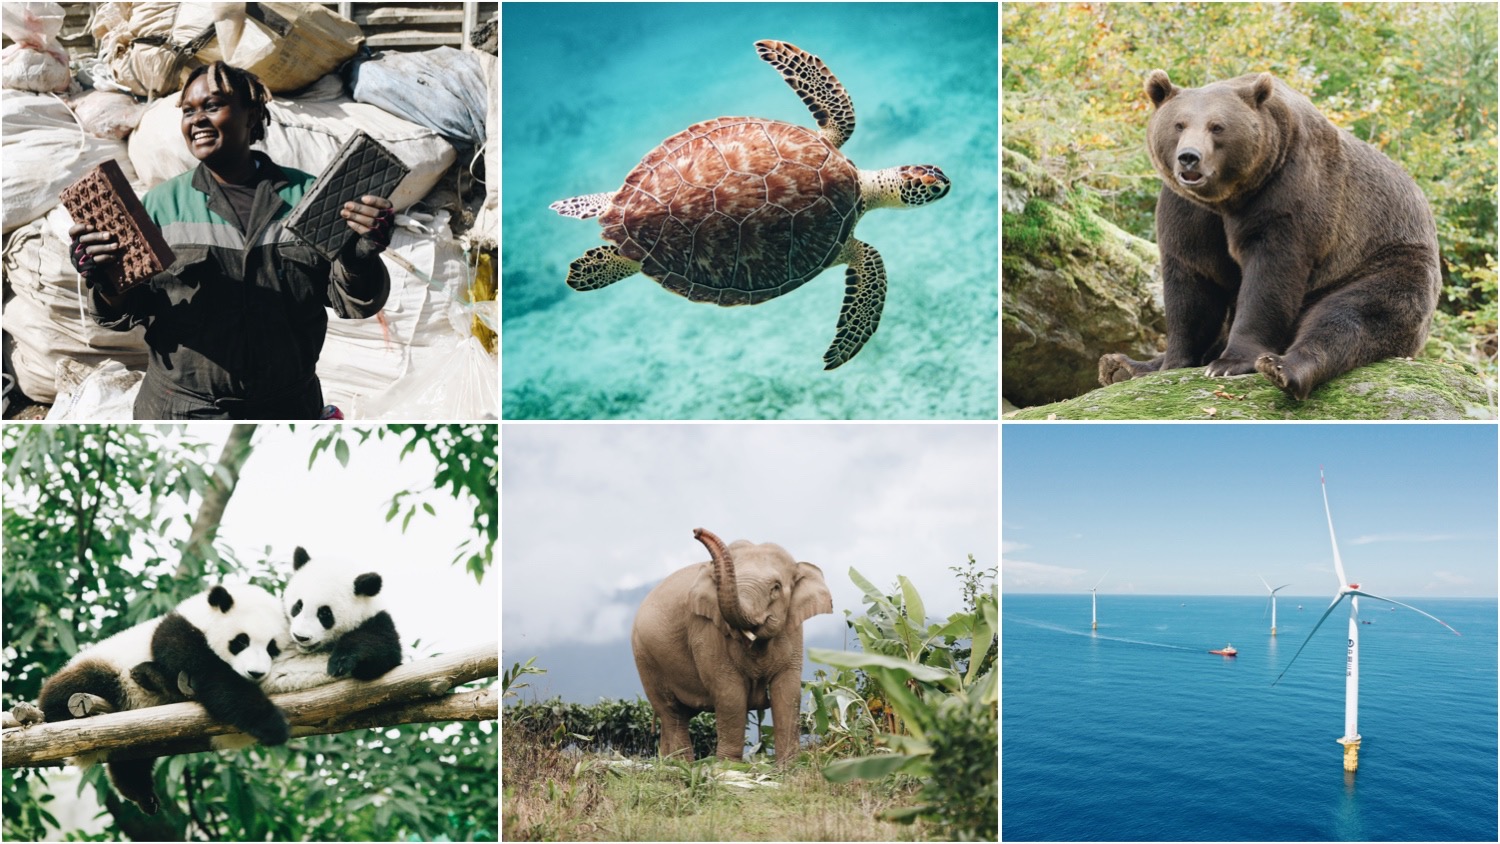 Clockwise from top left. Collage image shows Kenyan entrepeneur Nzambi Mateee, a swimming sea turtle, a brown bear, cuddling panda bears, an elephant, and wind farms, the focus of just some of 2021's most notable good climate news stories.